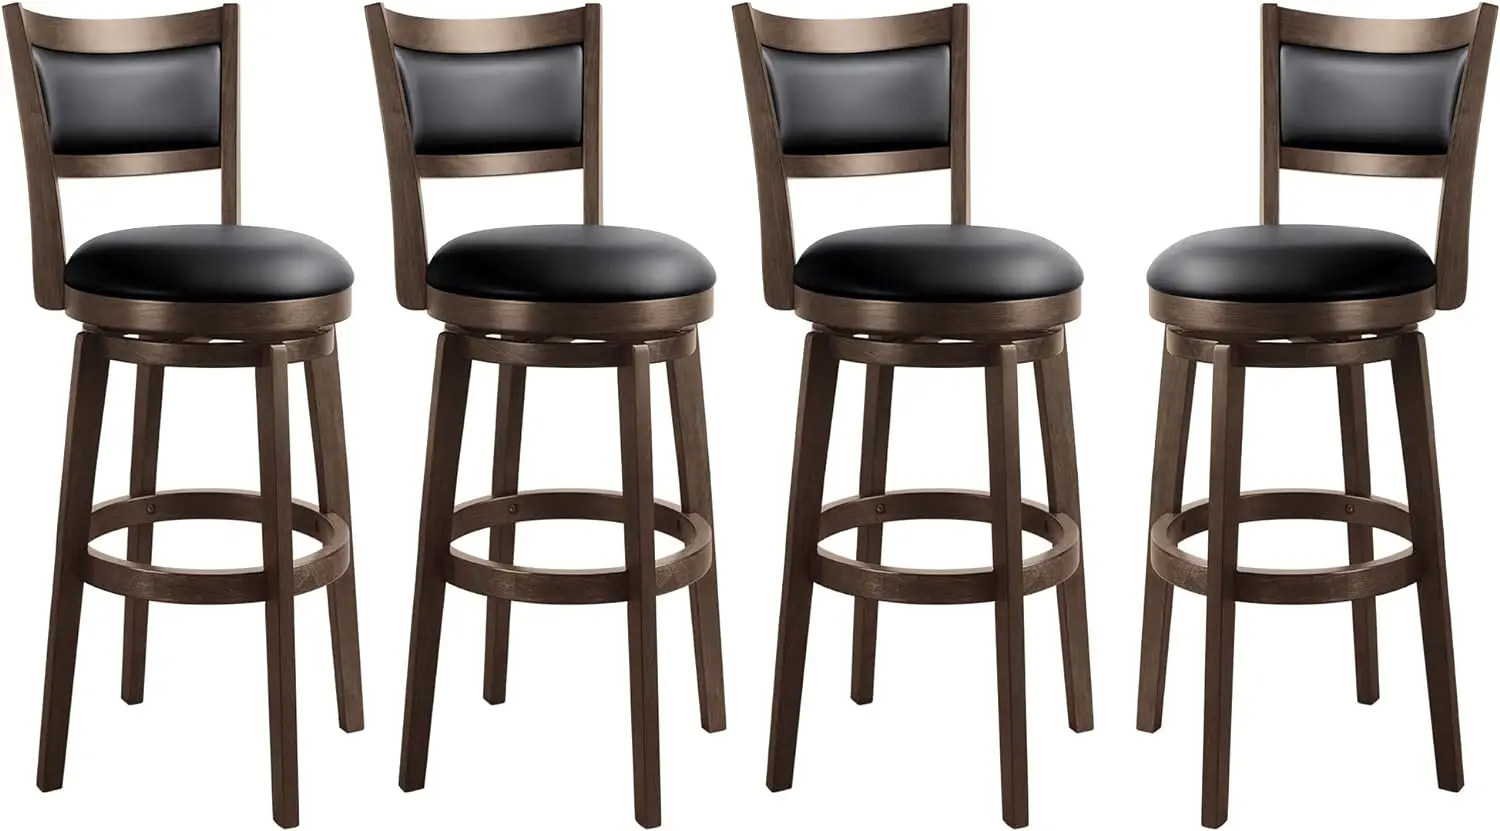 

30" Bar Height Stools Set of 4 - High Back Swivel Barstools with Black Faux Leather Upholstered Seat & Solid Wood Footrest